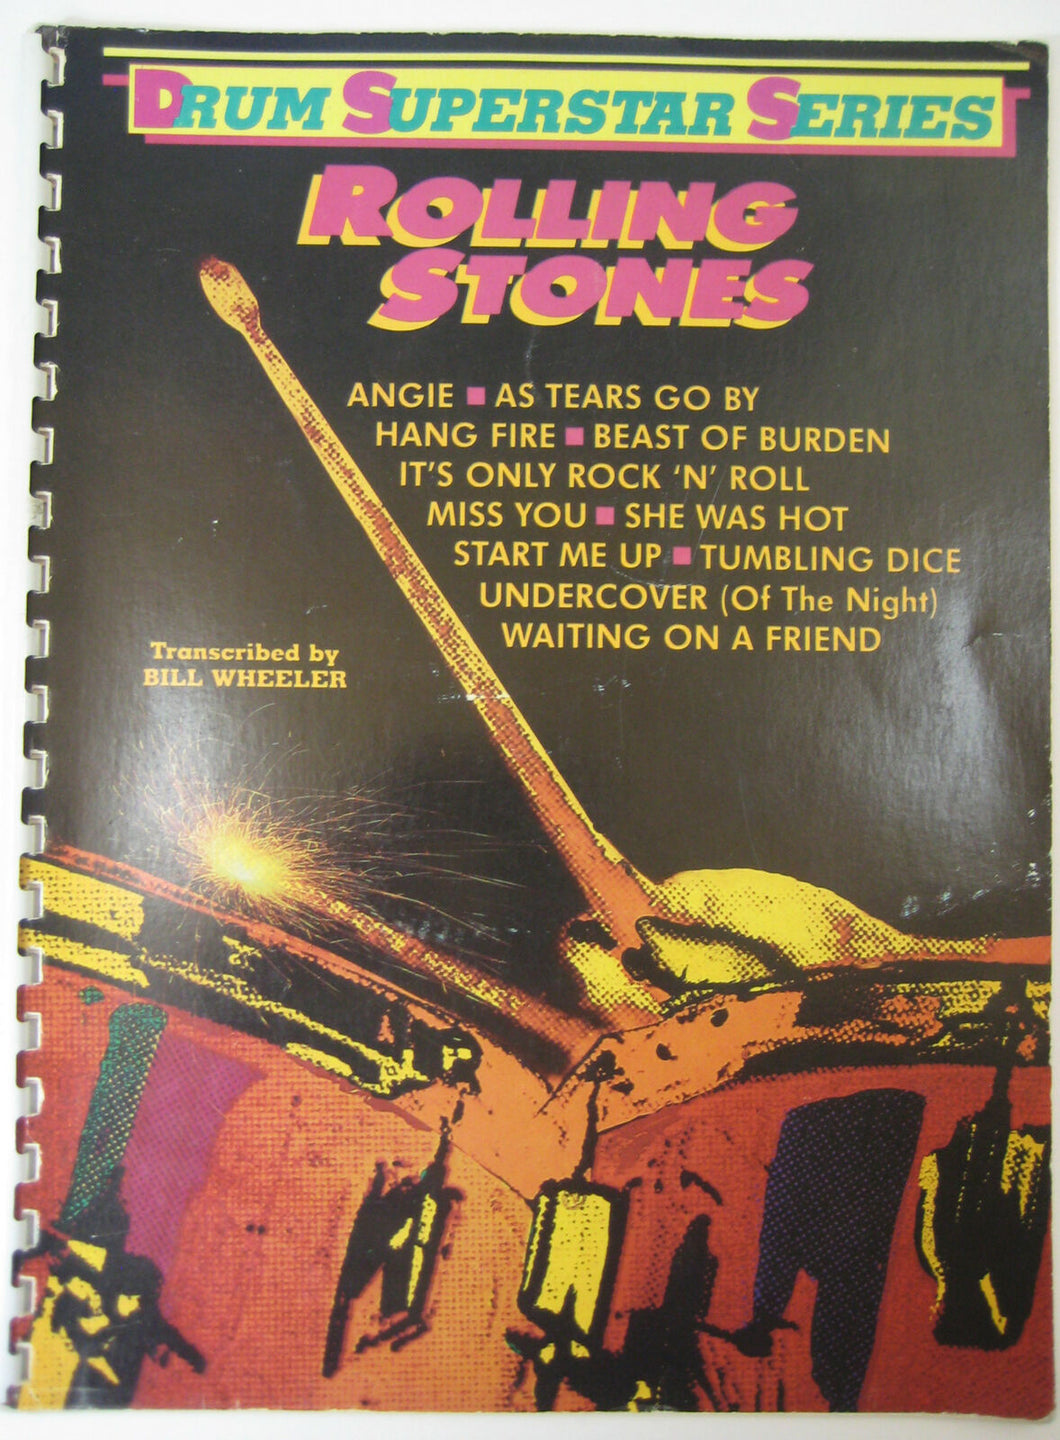 Start Me Up - The Rolling Stones - Collection of Drum Transcriptions / Drum Sheet Music - Warner Bros. RSDSS